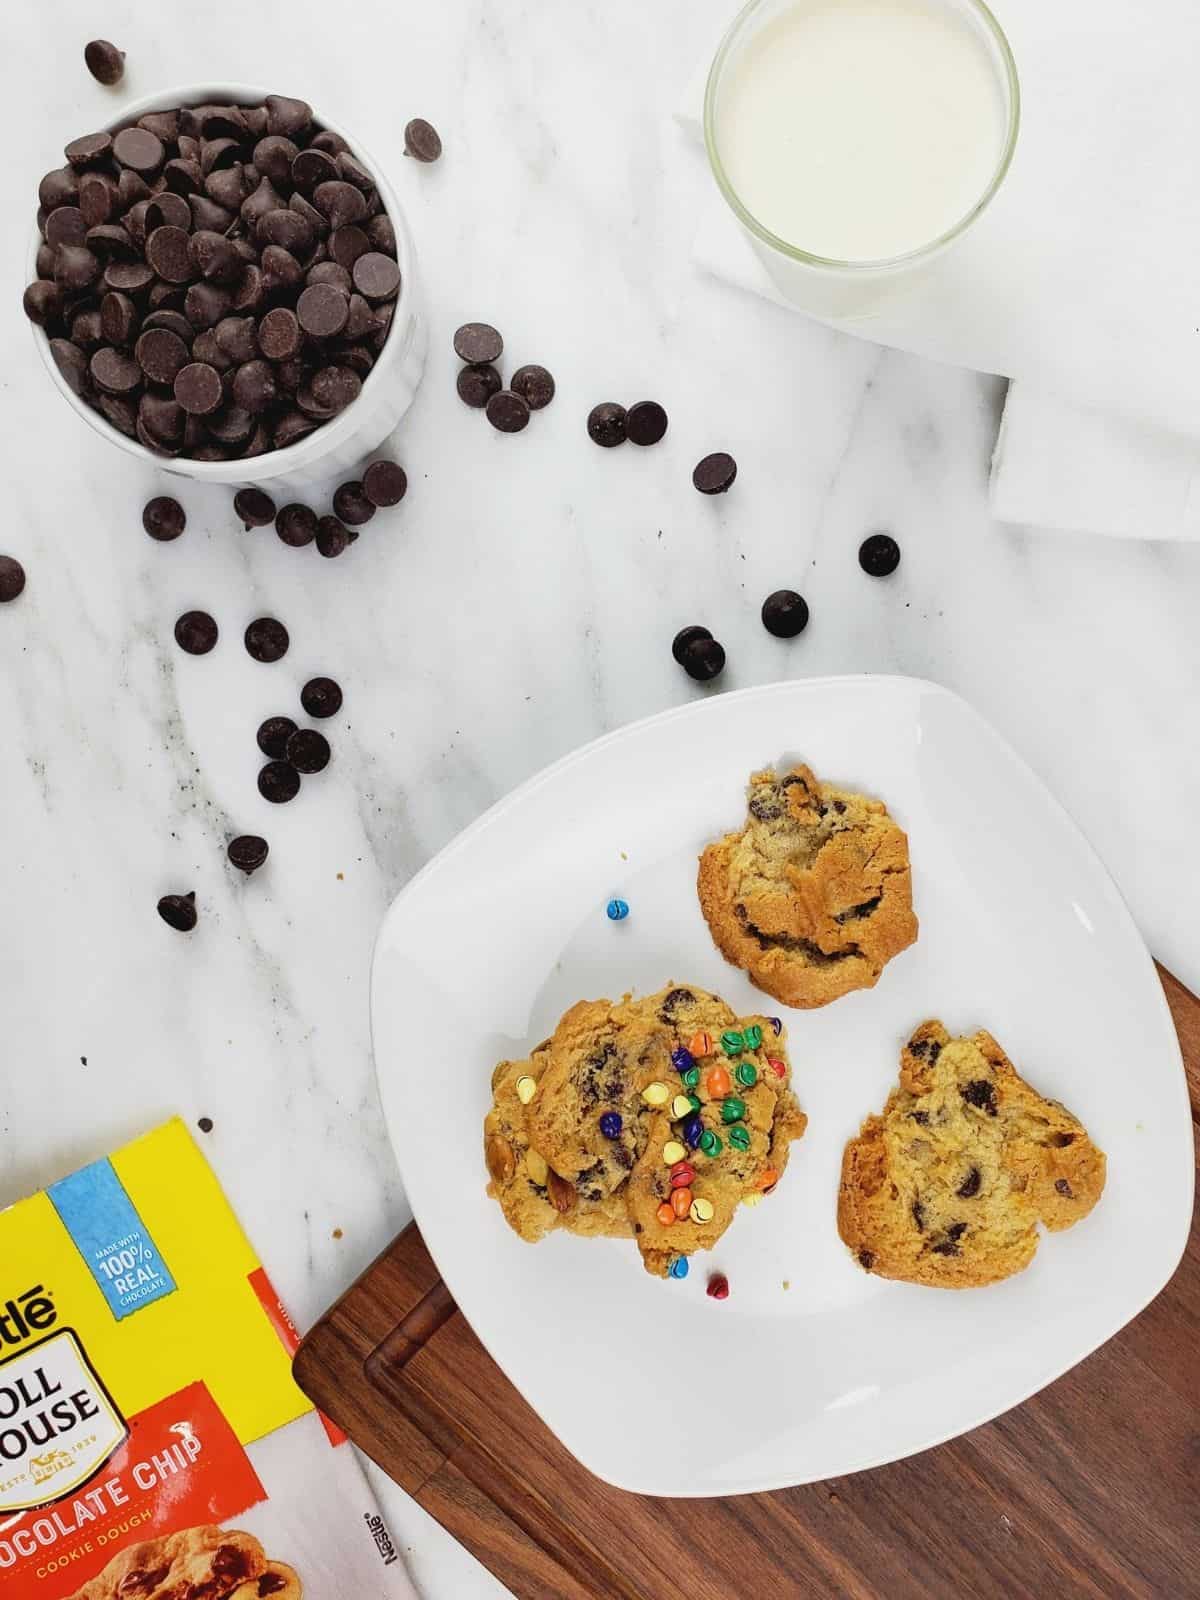 three cookie pieces with different toppings. served with chocolate chips and a glass of milk for dipping.